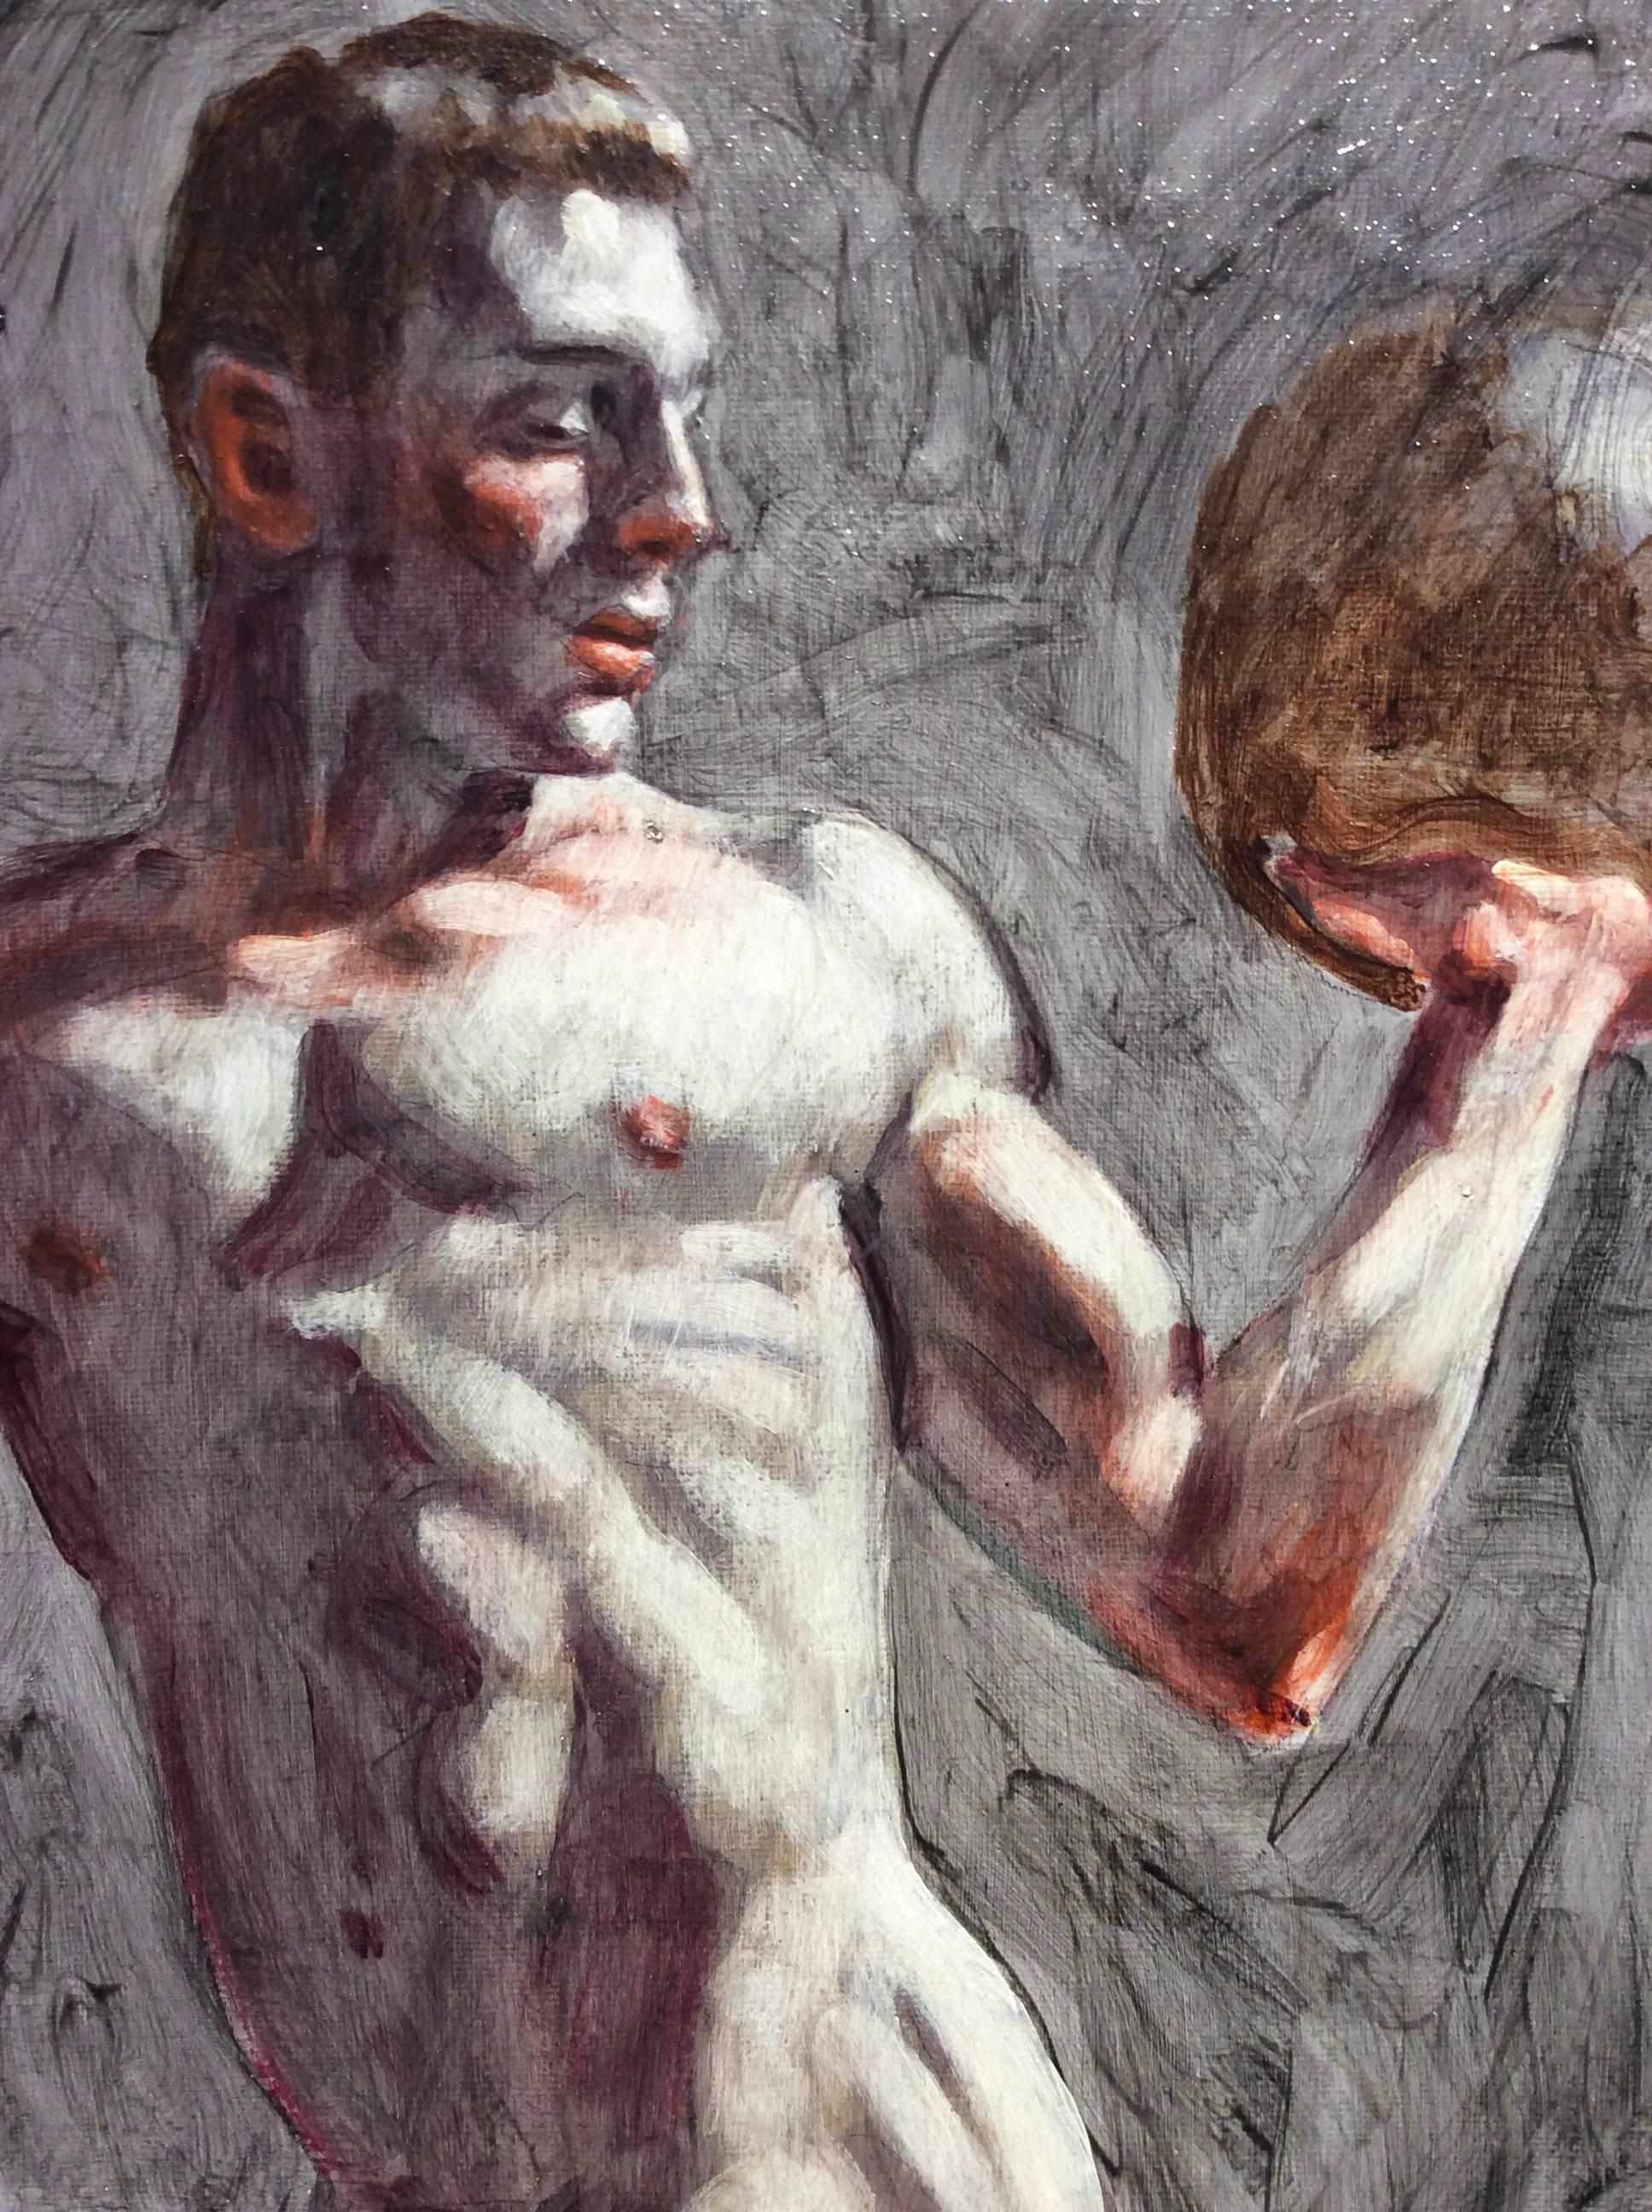 Athlete in the Nude (Figurative Oil Painting of Muscular Athlete with Shot Put) - Gray Figurative Painting by Mark Beard